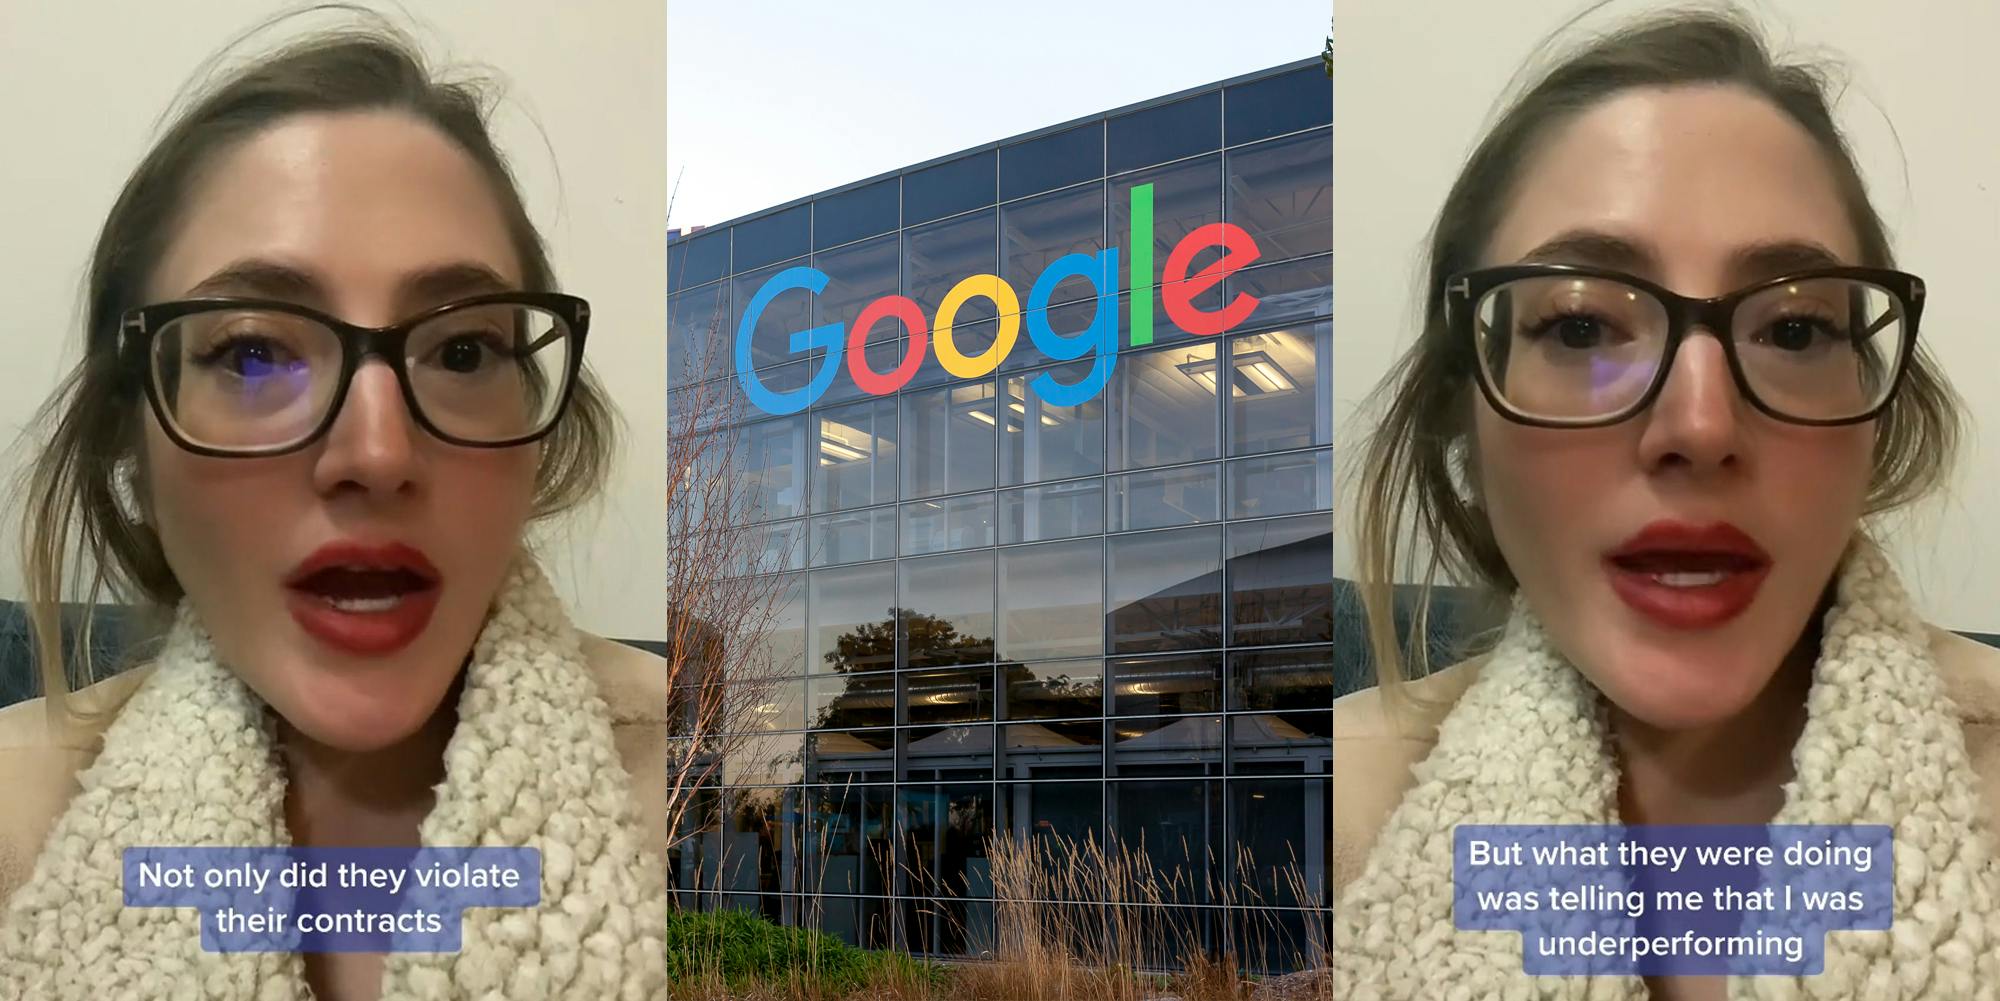 former Google employee speaking with caption "Not only did they violate their contracts" (l) Google building with sign (c) former Google employee speaking with caption "But what they were doing was telling me I'm underperforming" (r)